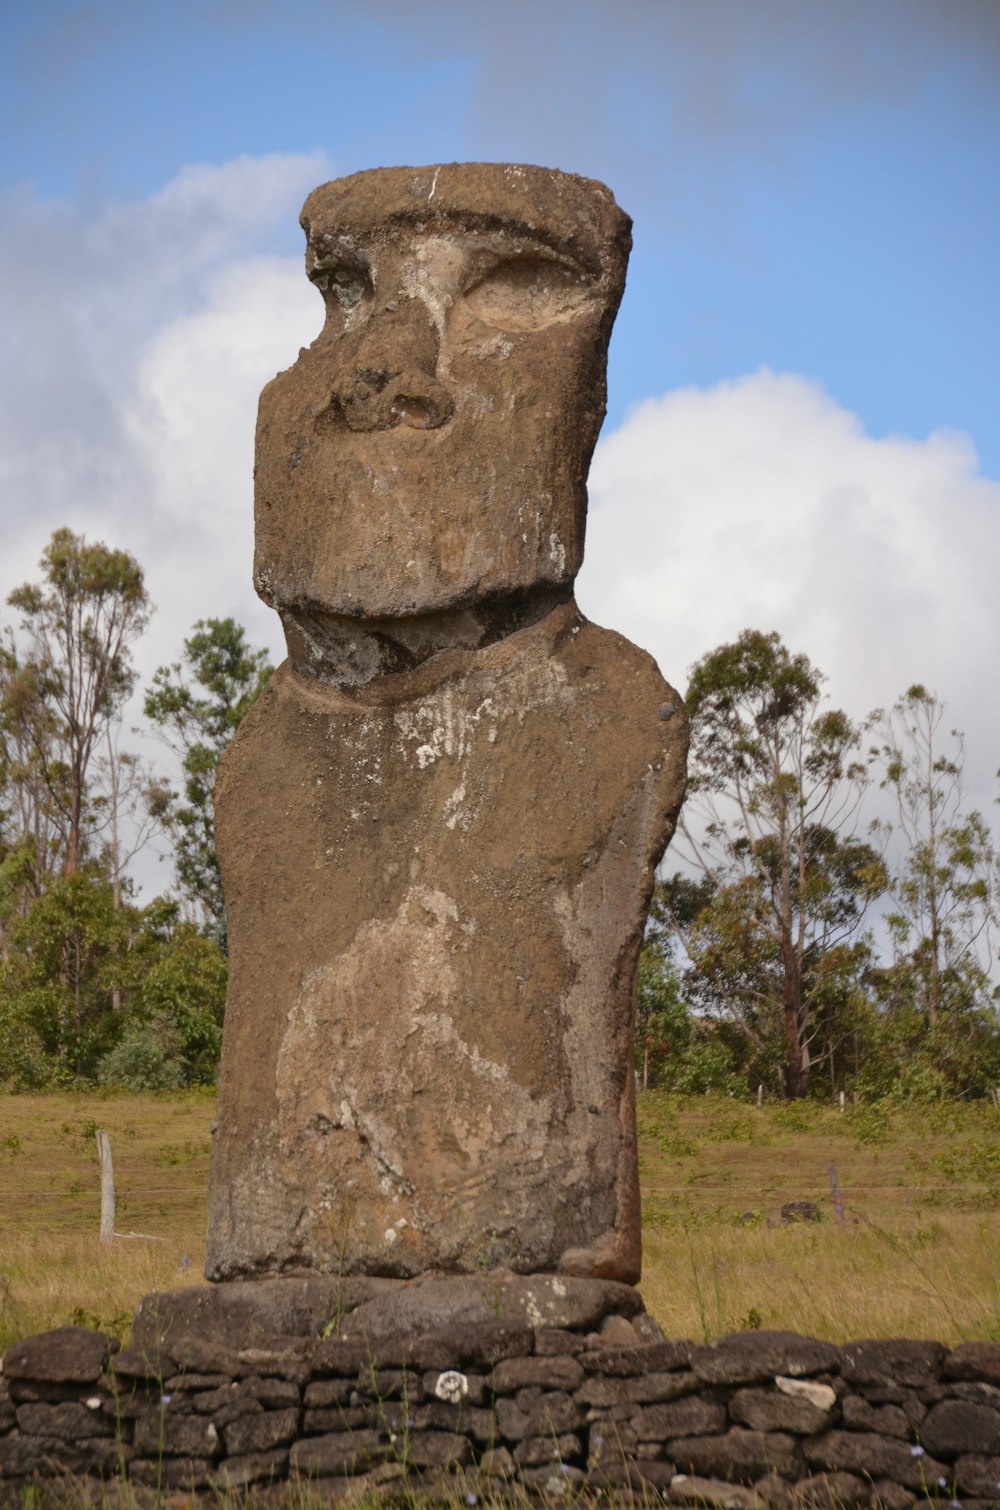 a large stone statue in a grassy field